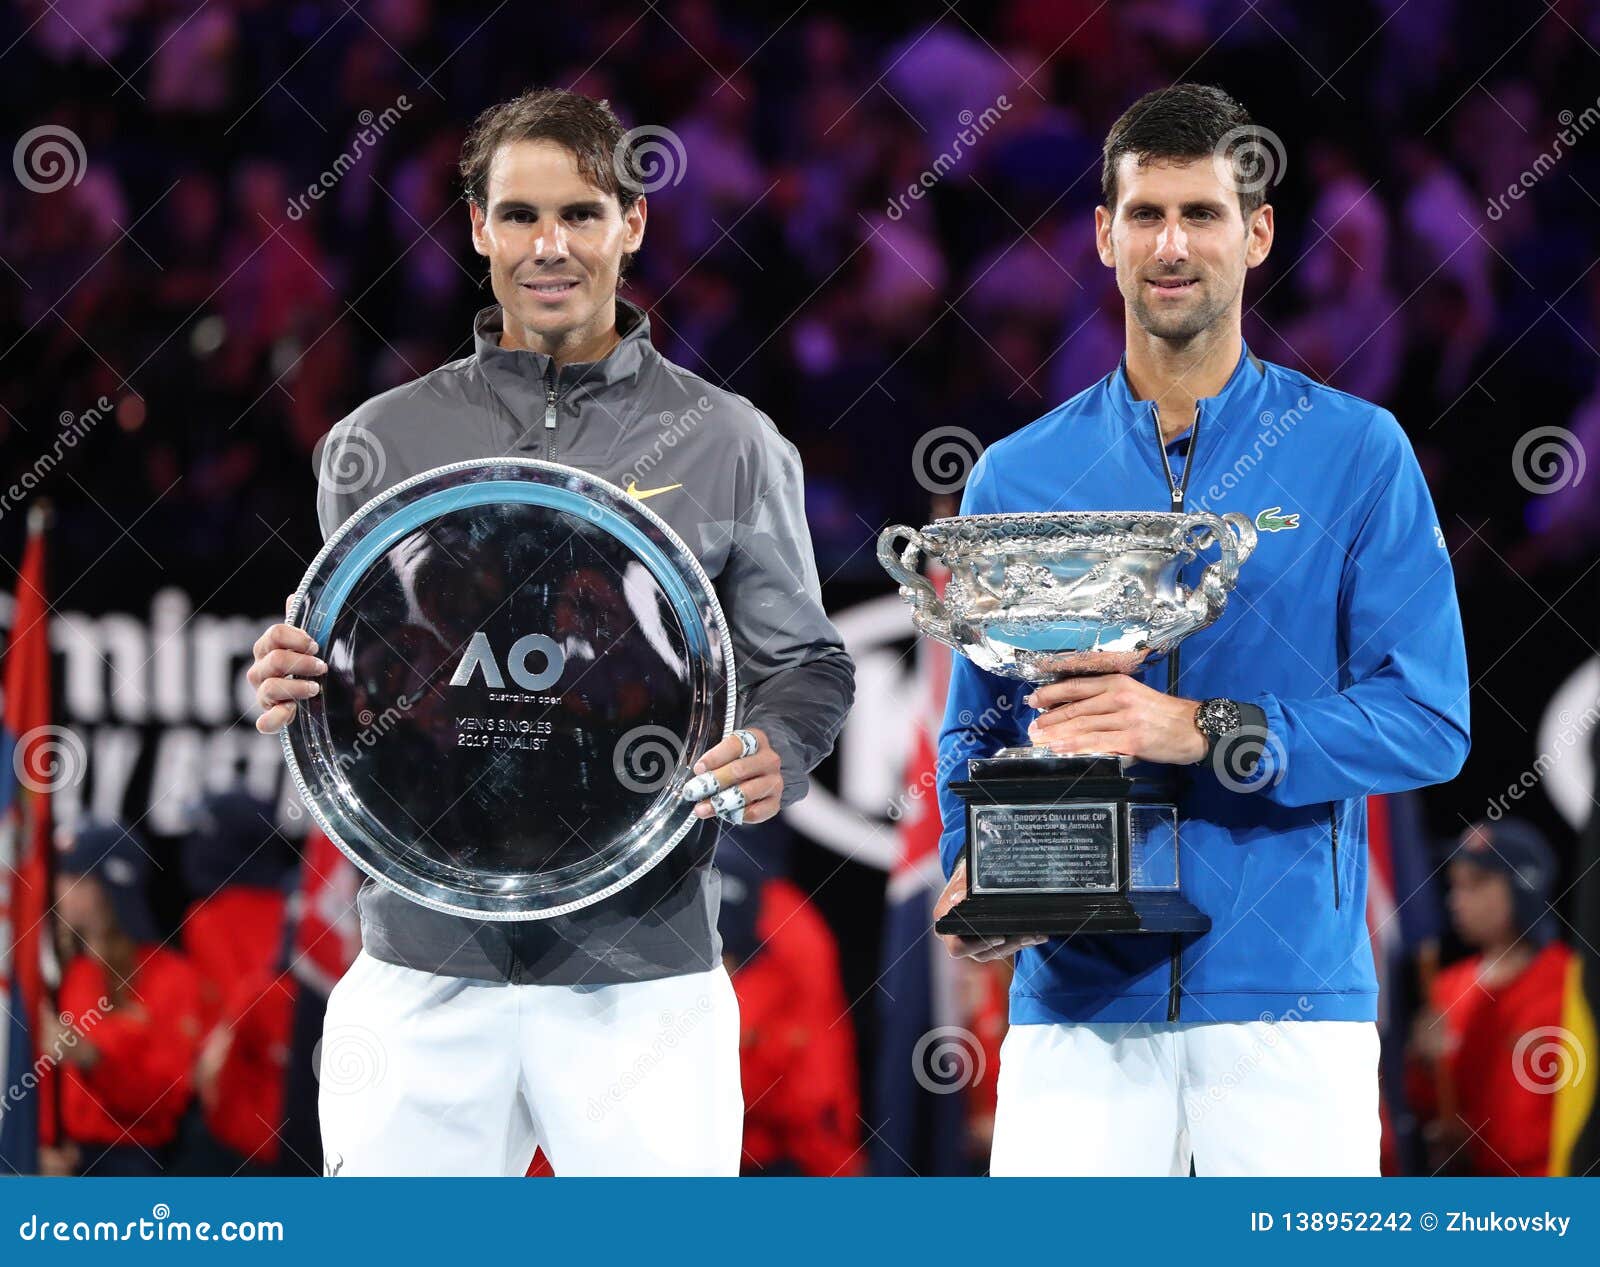 Rafael Nadal of L and 2019 Australian Open Champion Djokovic during Trophy Presentation after Match Editorial Photography - Image of action, match: 138952242